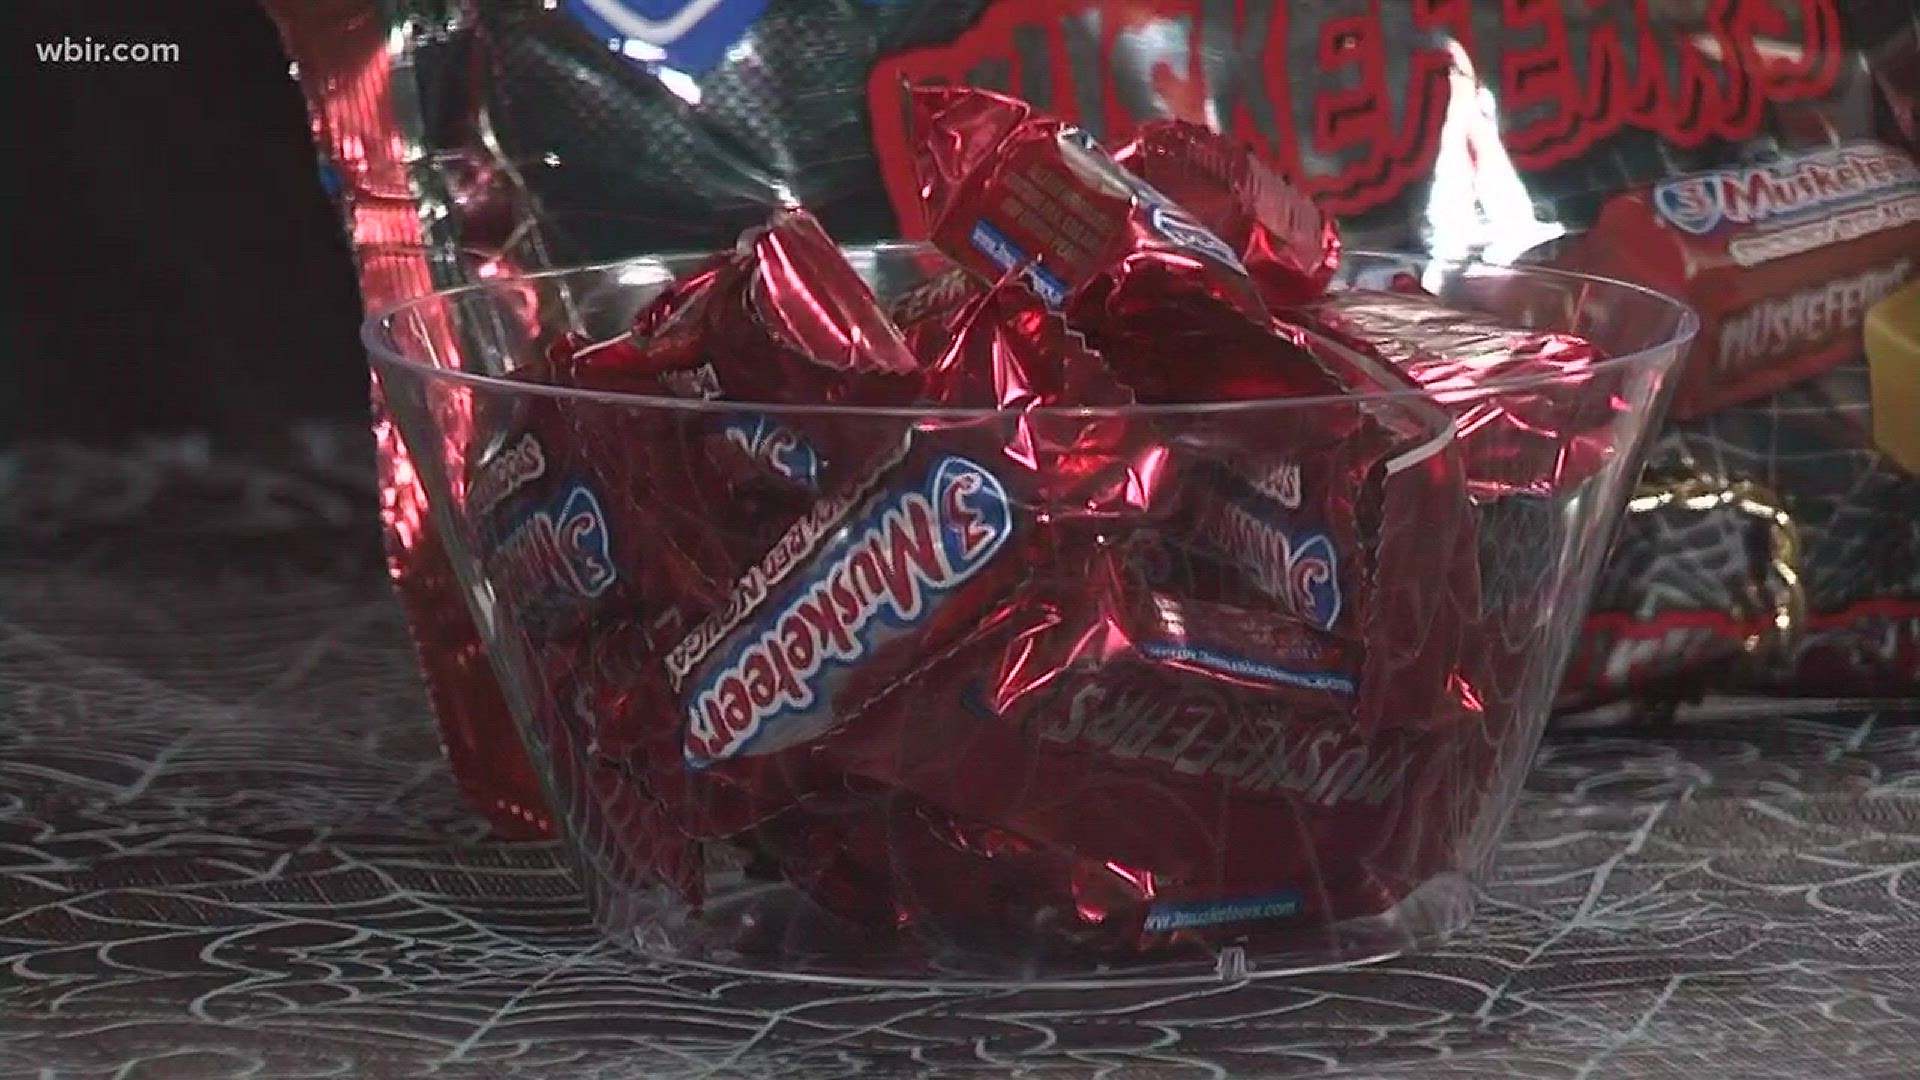 UT Retail professor Michelle Childs discusses candy trends for this Halloween.